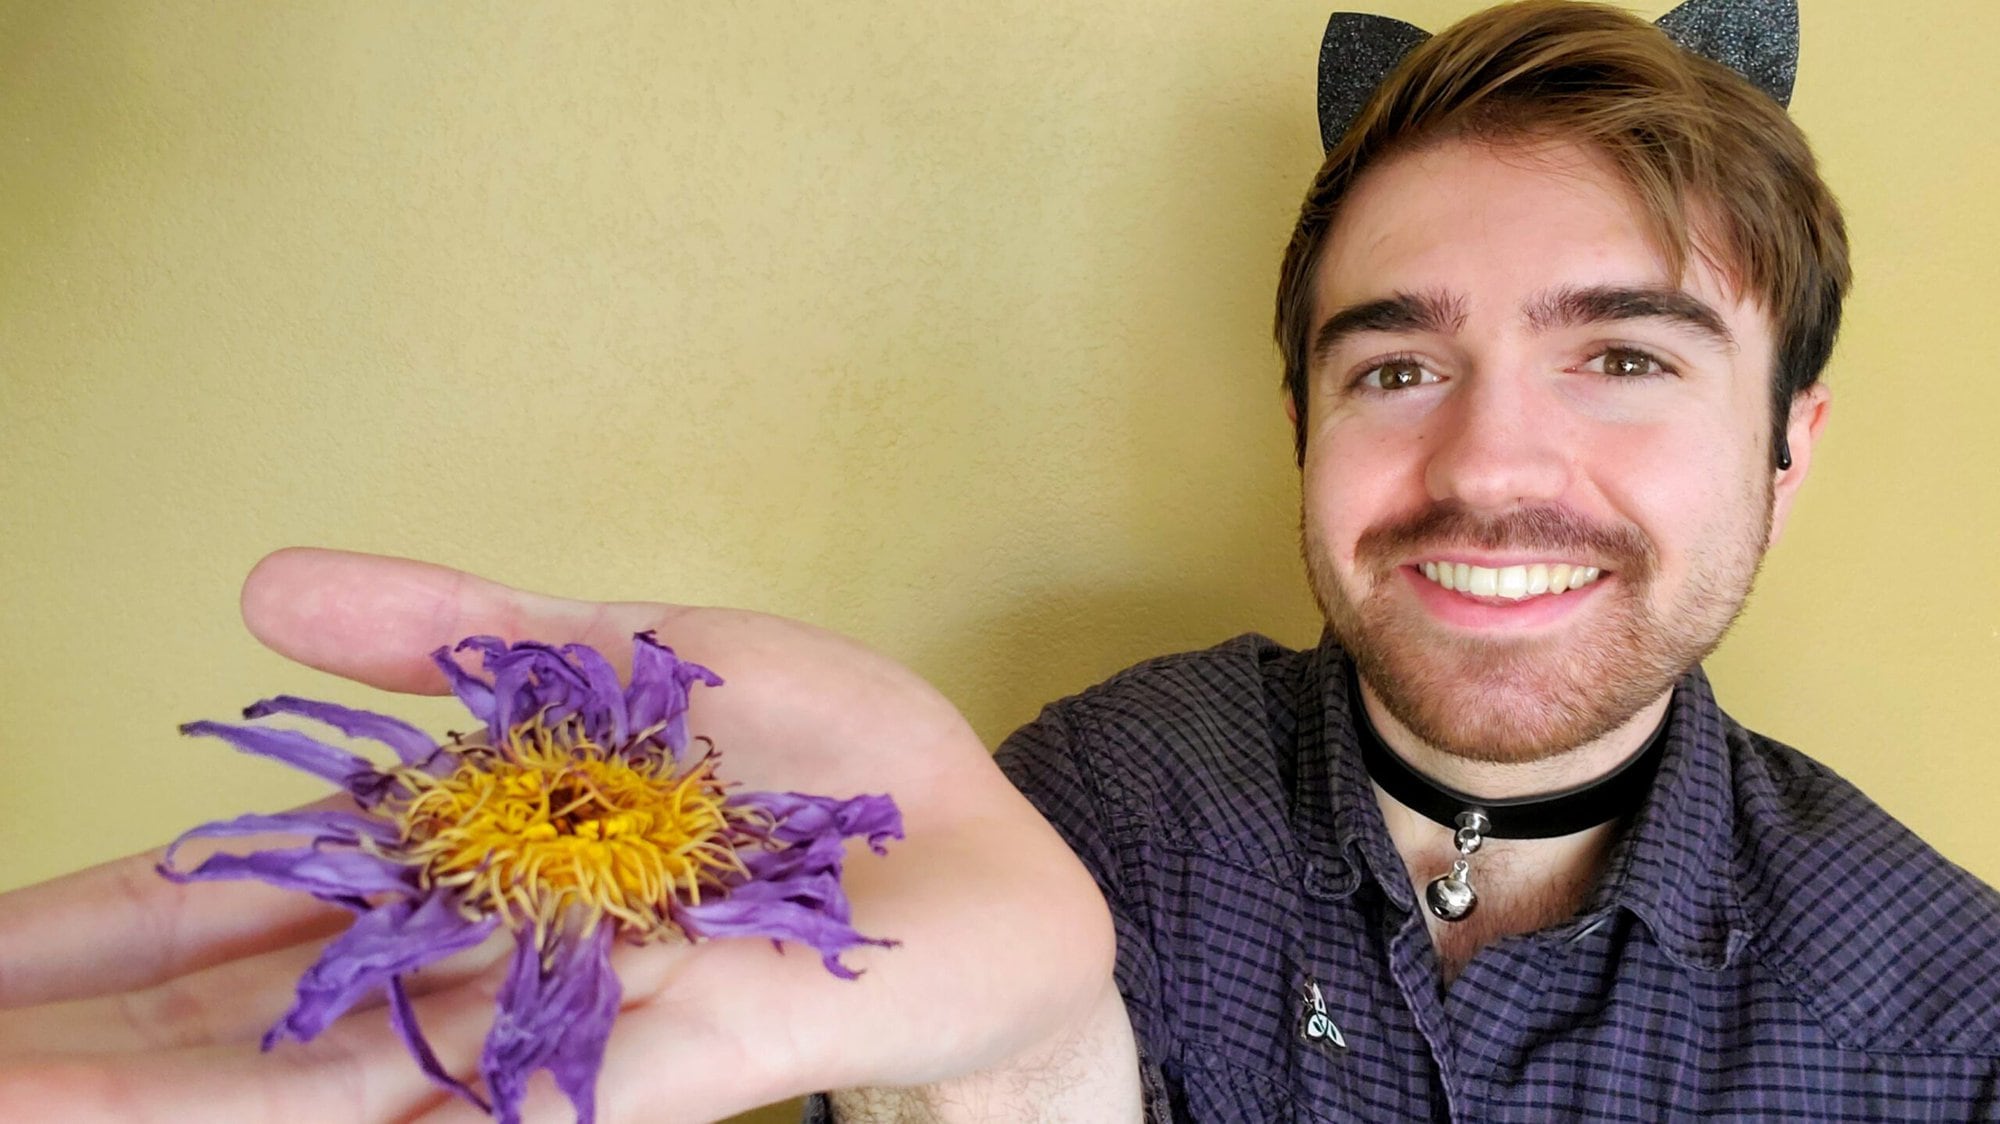 Sober Catboy holding a dry blue lotus flower in his hand